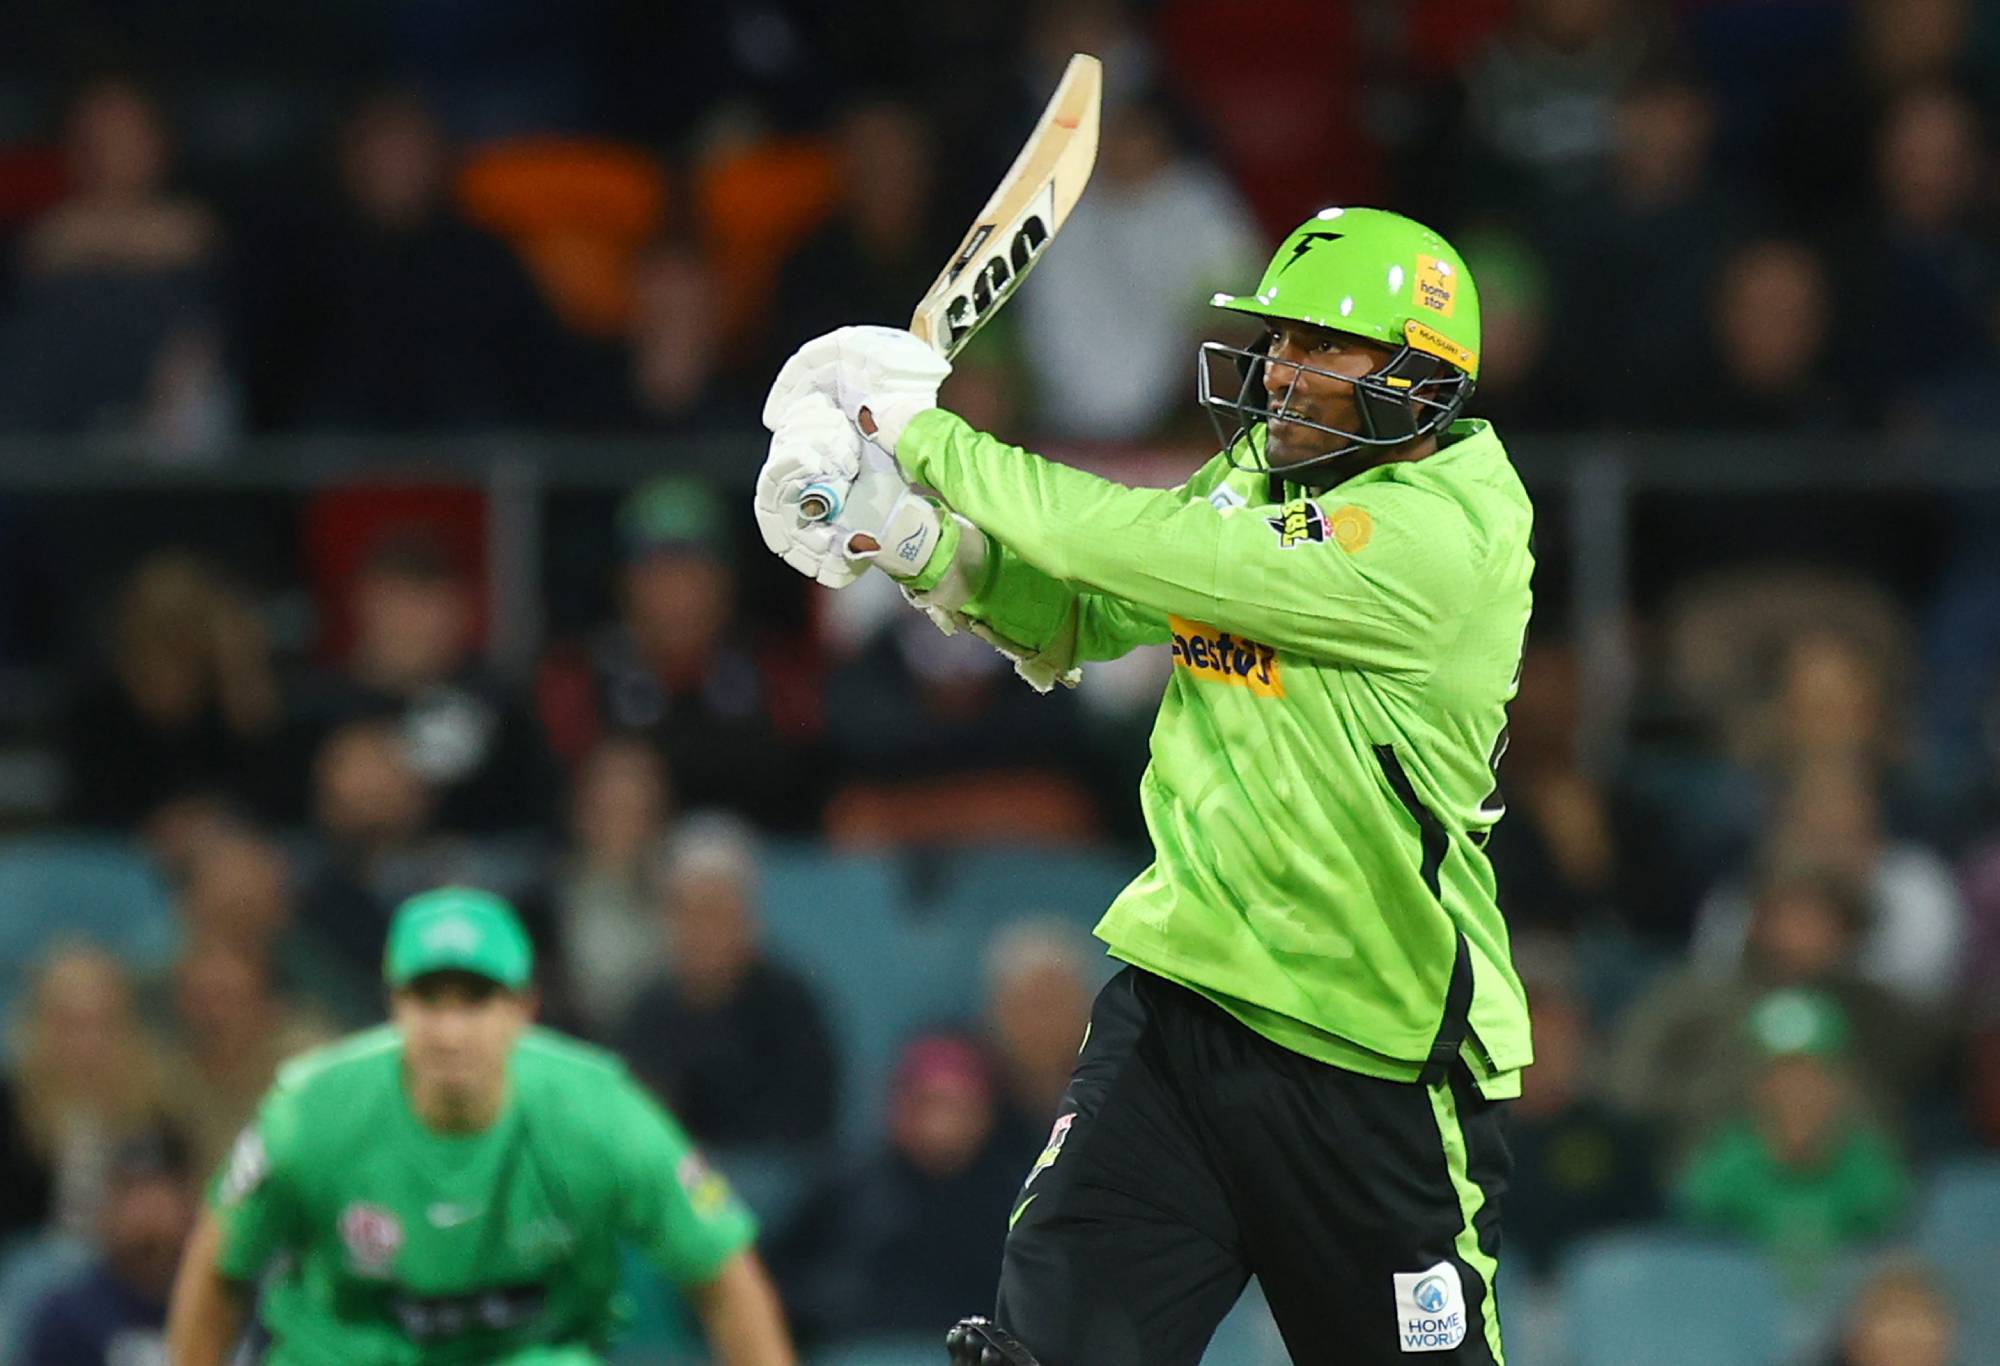 CANBERRA, AUSTRALIA - DECEMBER 13: Gurinder Sandhu of the Thunder bats during the Men's Big Bash League match between the Sydney Thunder and the Melbourne Stars at Manuka Oval, on December 13, 2022, in Canberra, Australia. (Photo by Mark Nolan/Getty Images)